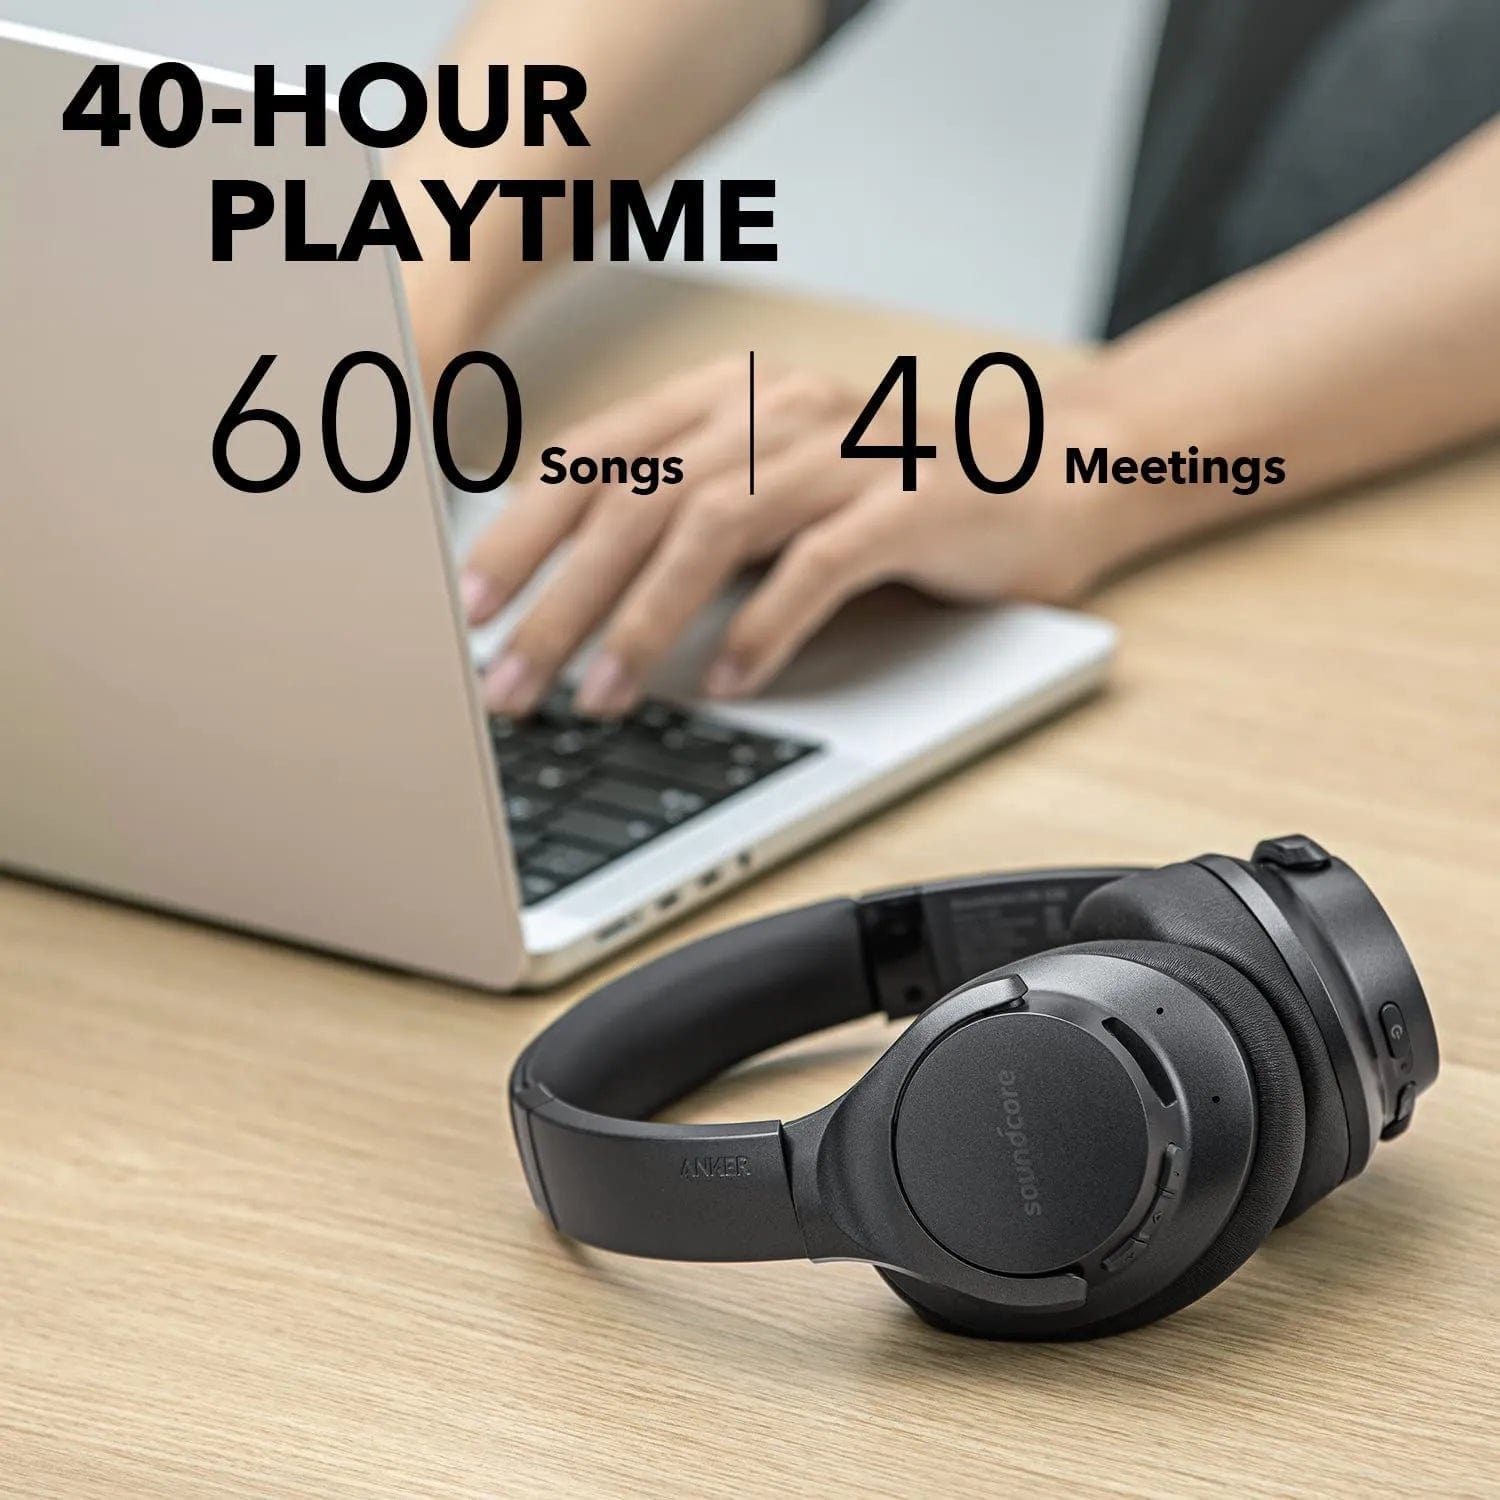 Soundcore China Soundcore, Wireless Over Ear, Version Life Q20, Supports Bluetooth 5.0, Playtime up to 40 Hours, Color Black